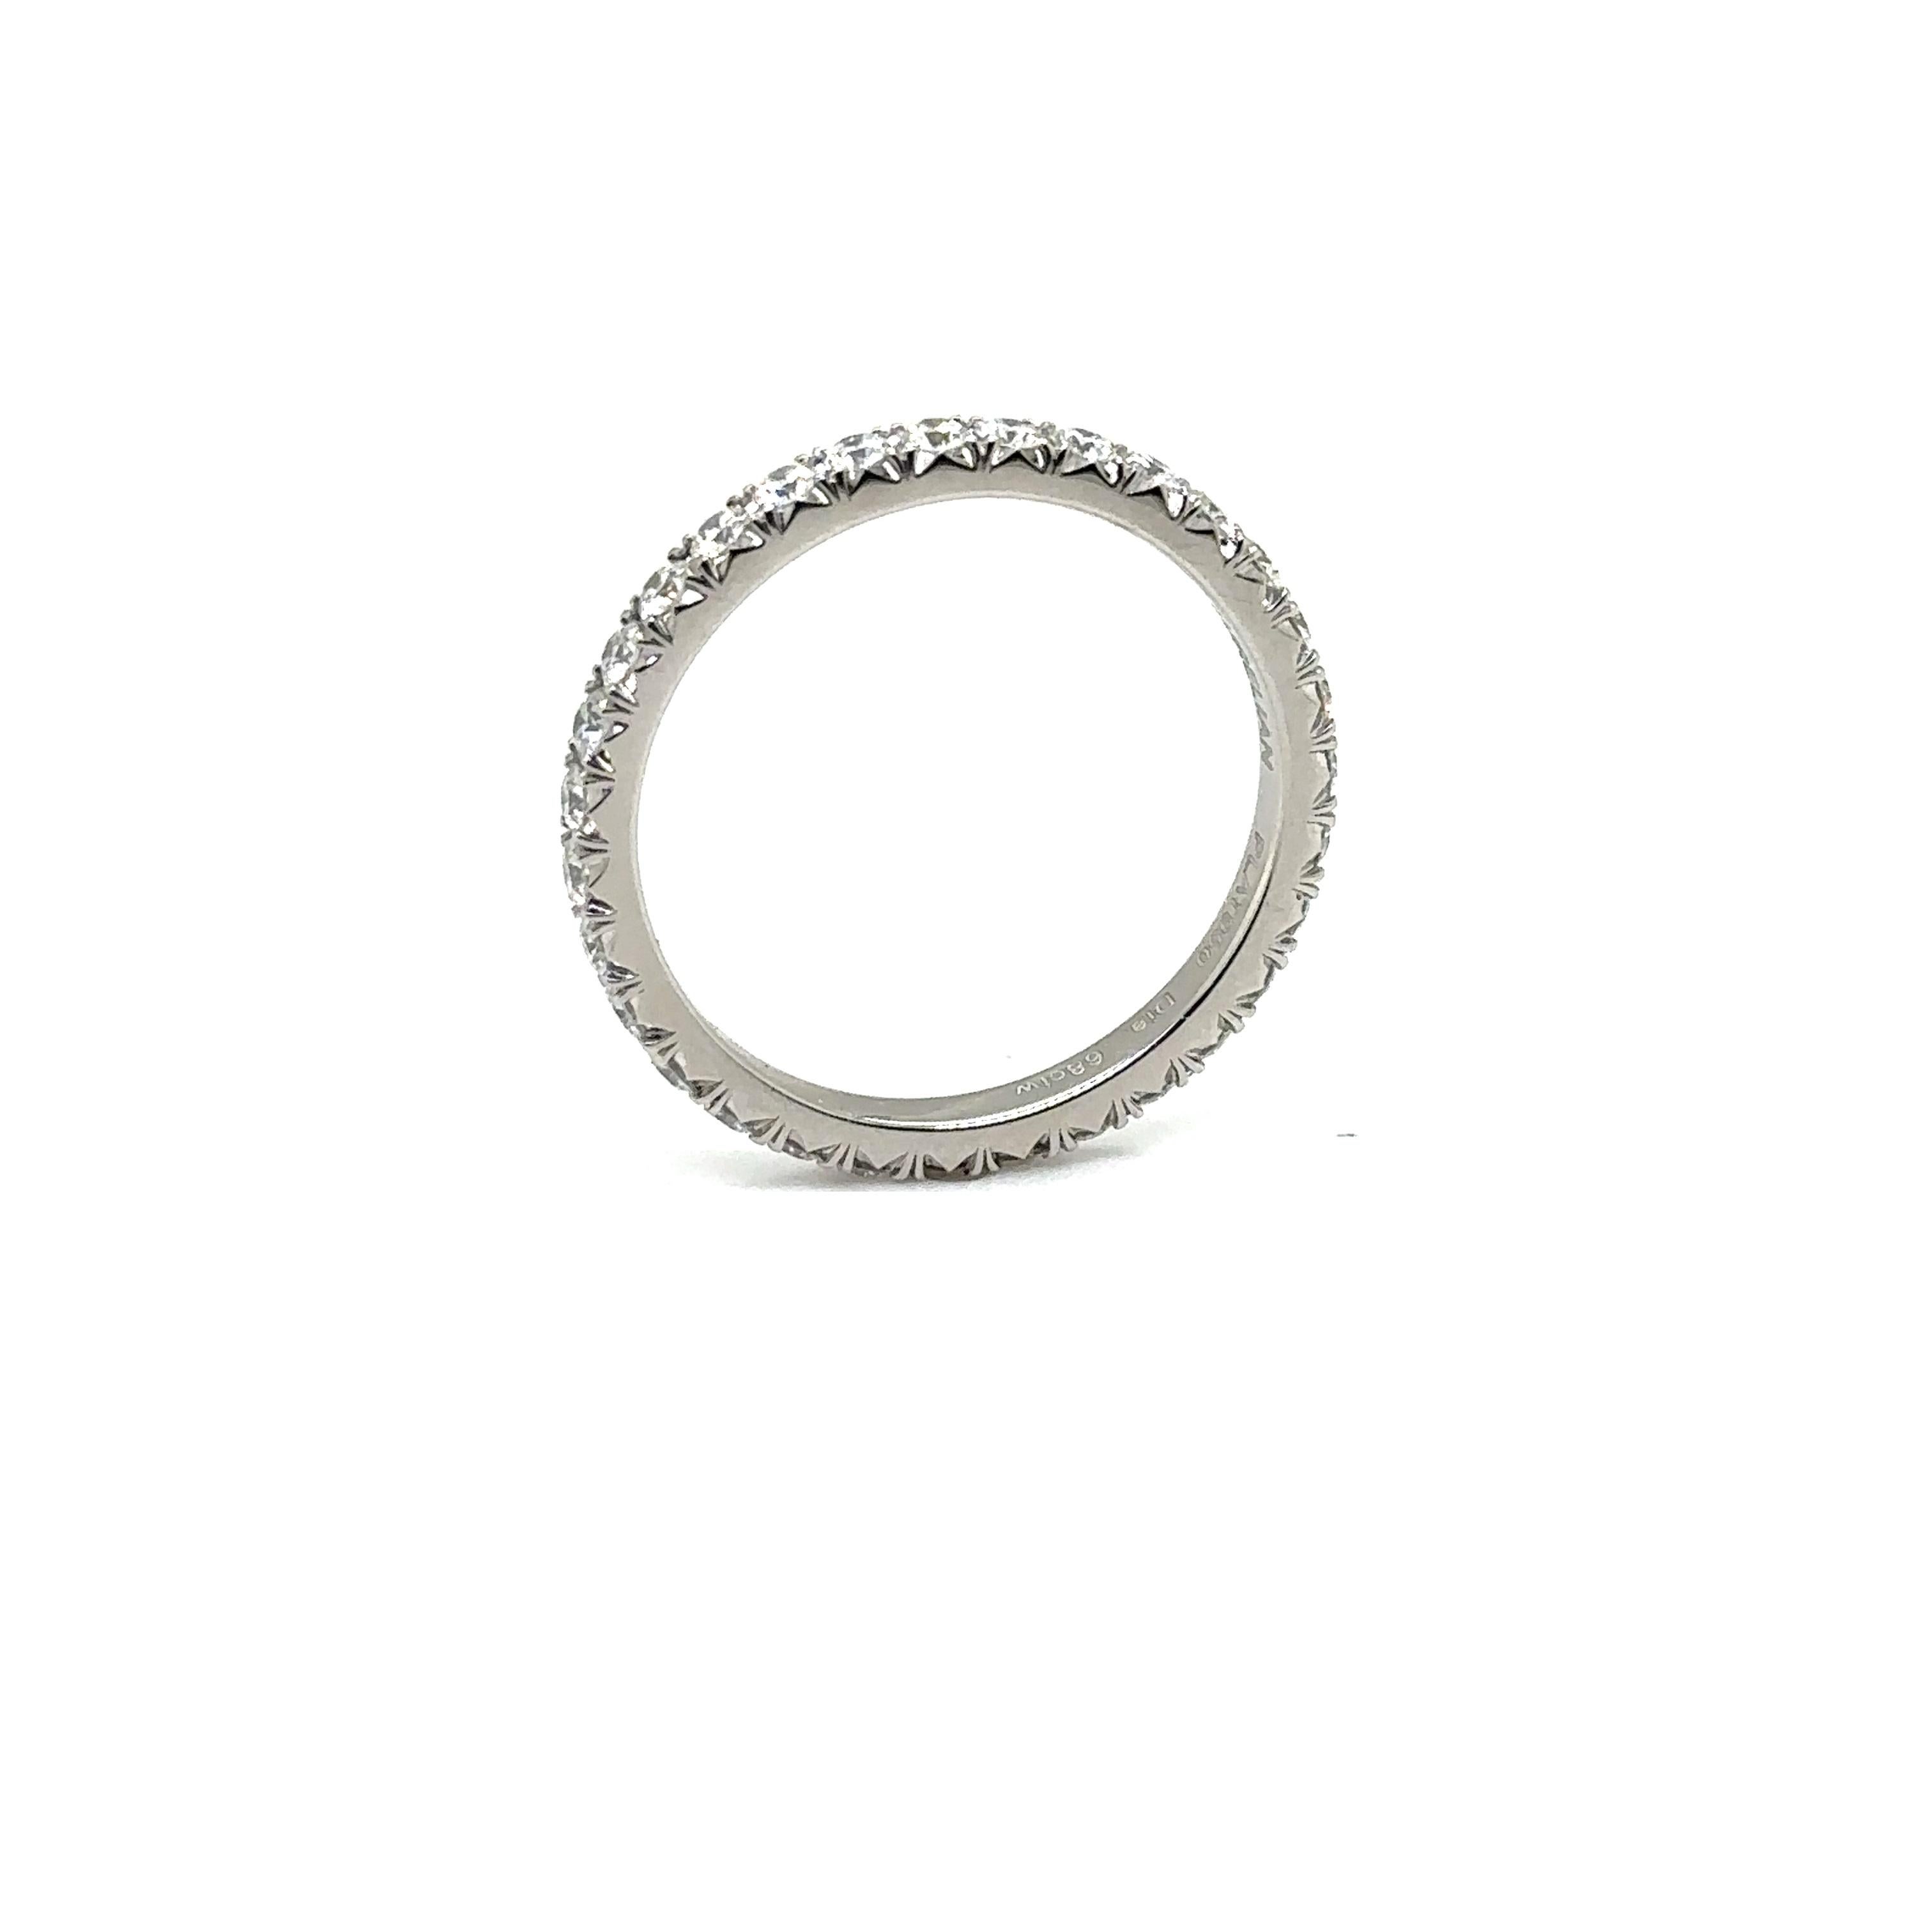 WB31 PLAT - PLATINUM WEDDING BAND with 0.68 CWT DIAMONDS For Sale 2